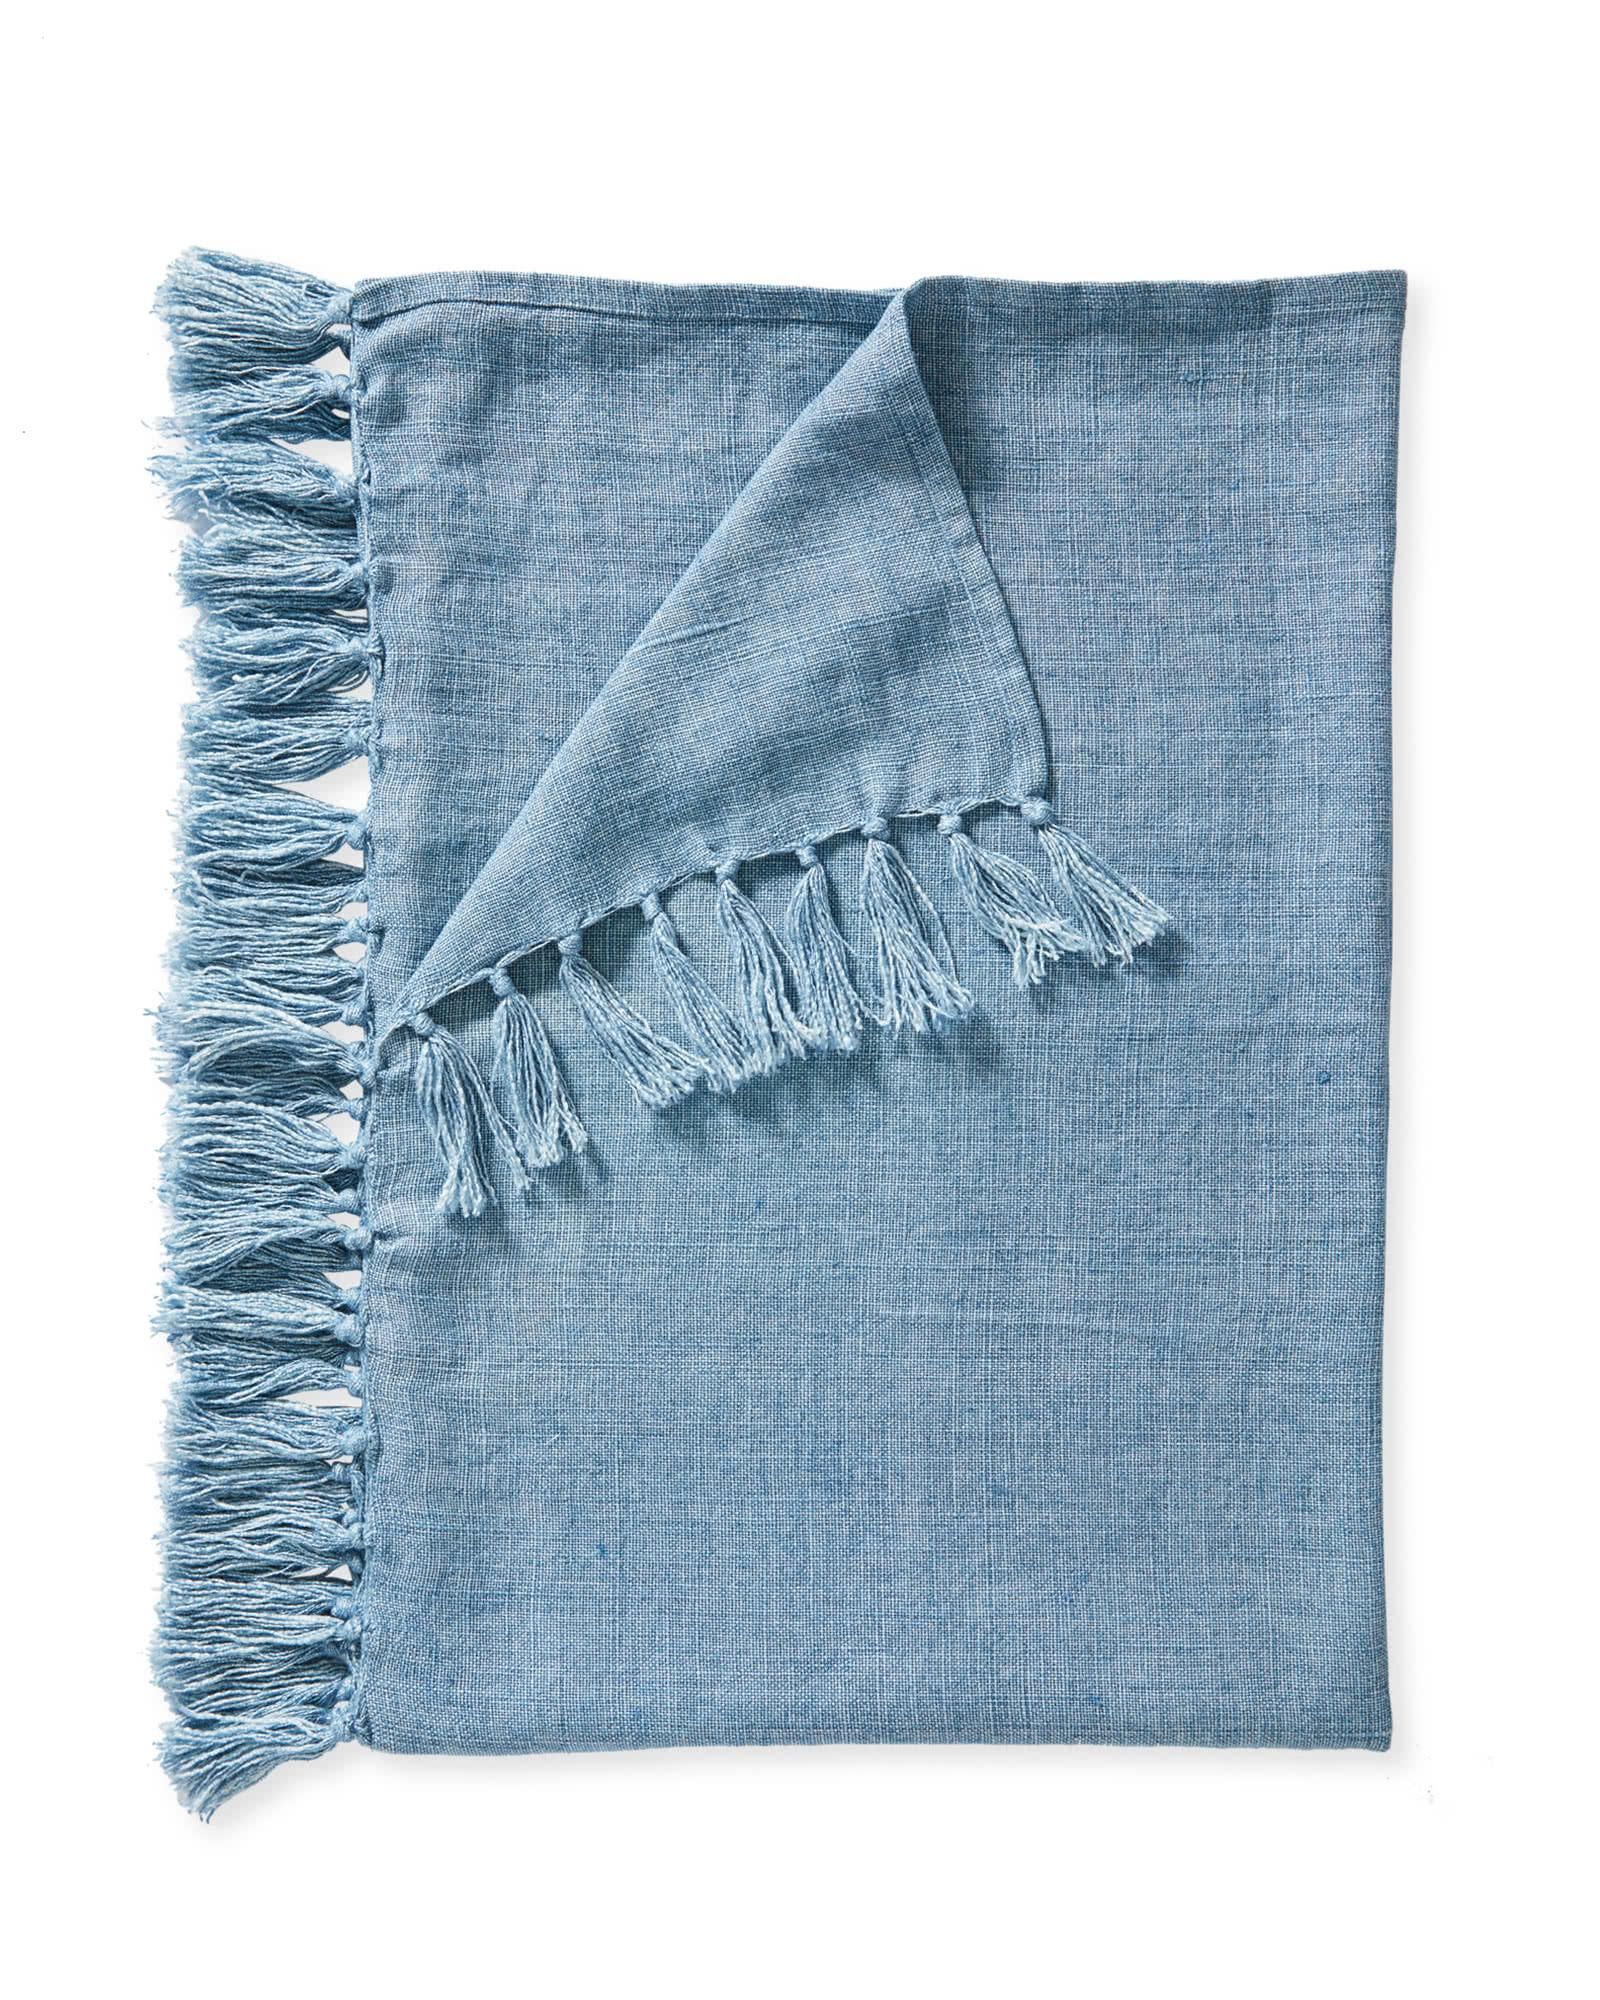 Mendocino Linen Throw | Serena and Lily